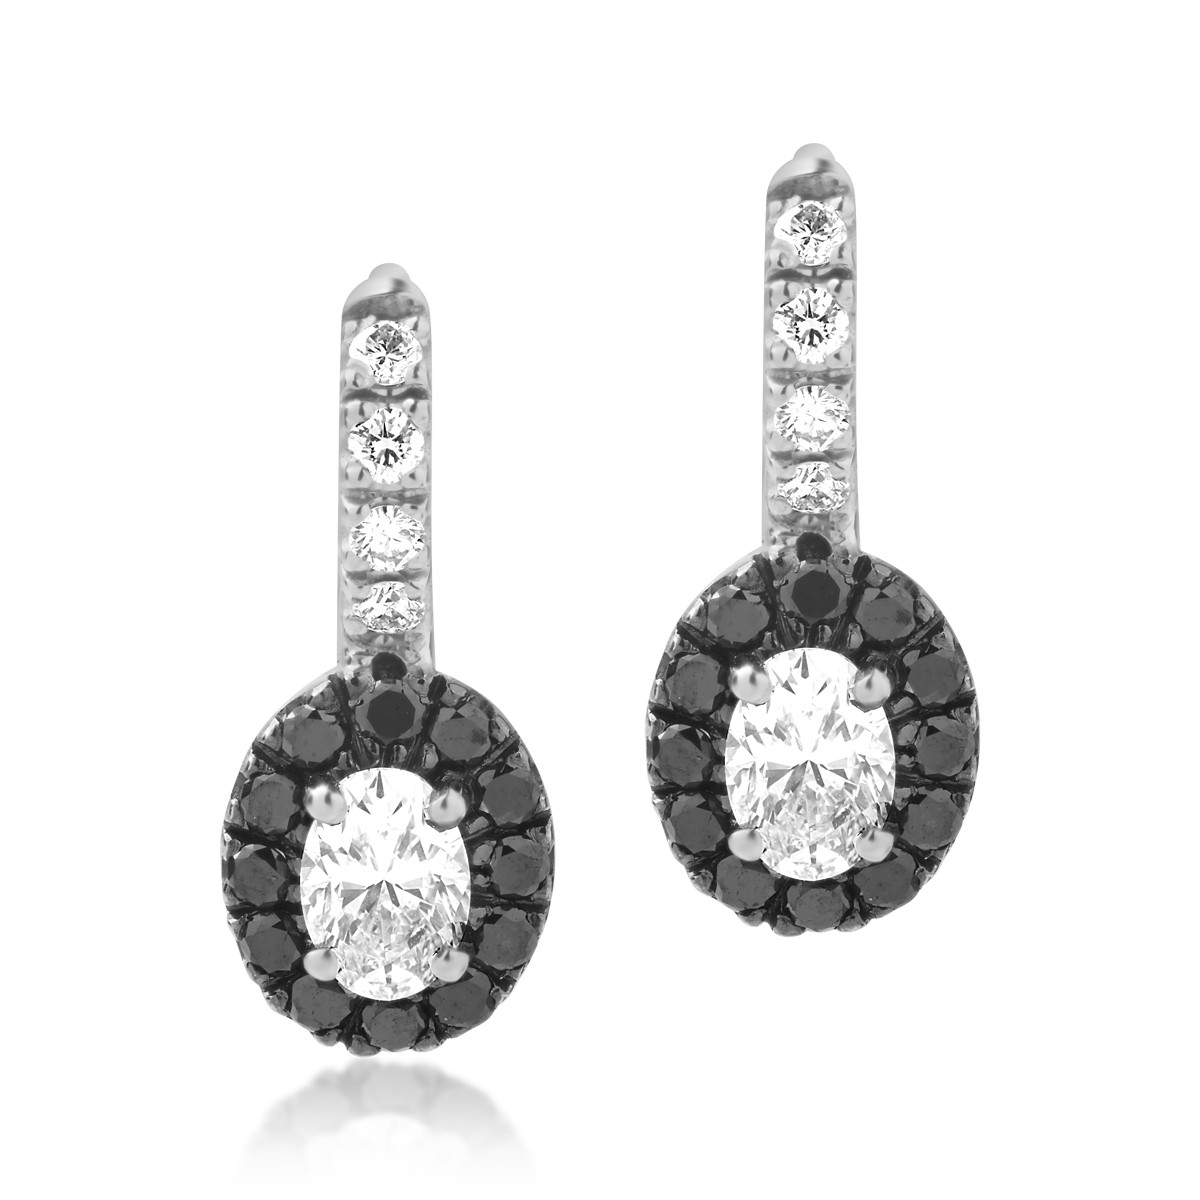 18K white gold earrings with 0.74ct clear diamonds and 0.32ct black diamonds